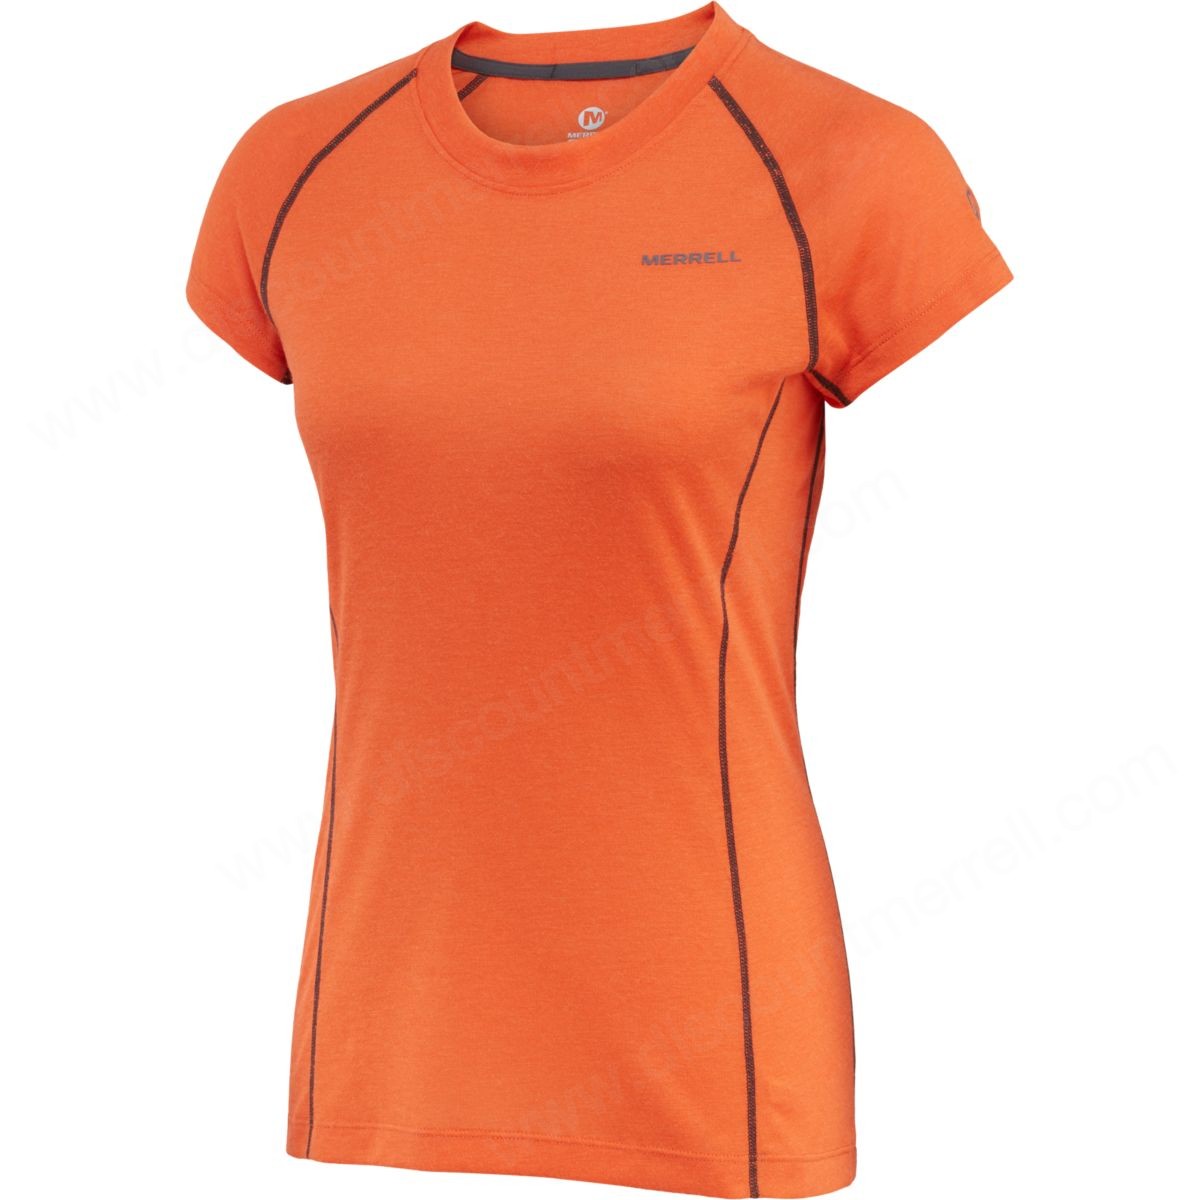 Merrell Women's Paradox Short Sleeve Tech T-Shirts With Drirelease® Fabric Lychee Heather - Merrell Women's Paradox Short Sleeve Tech T-Shirts With Drirelease® Fabric Lychee Heather